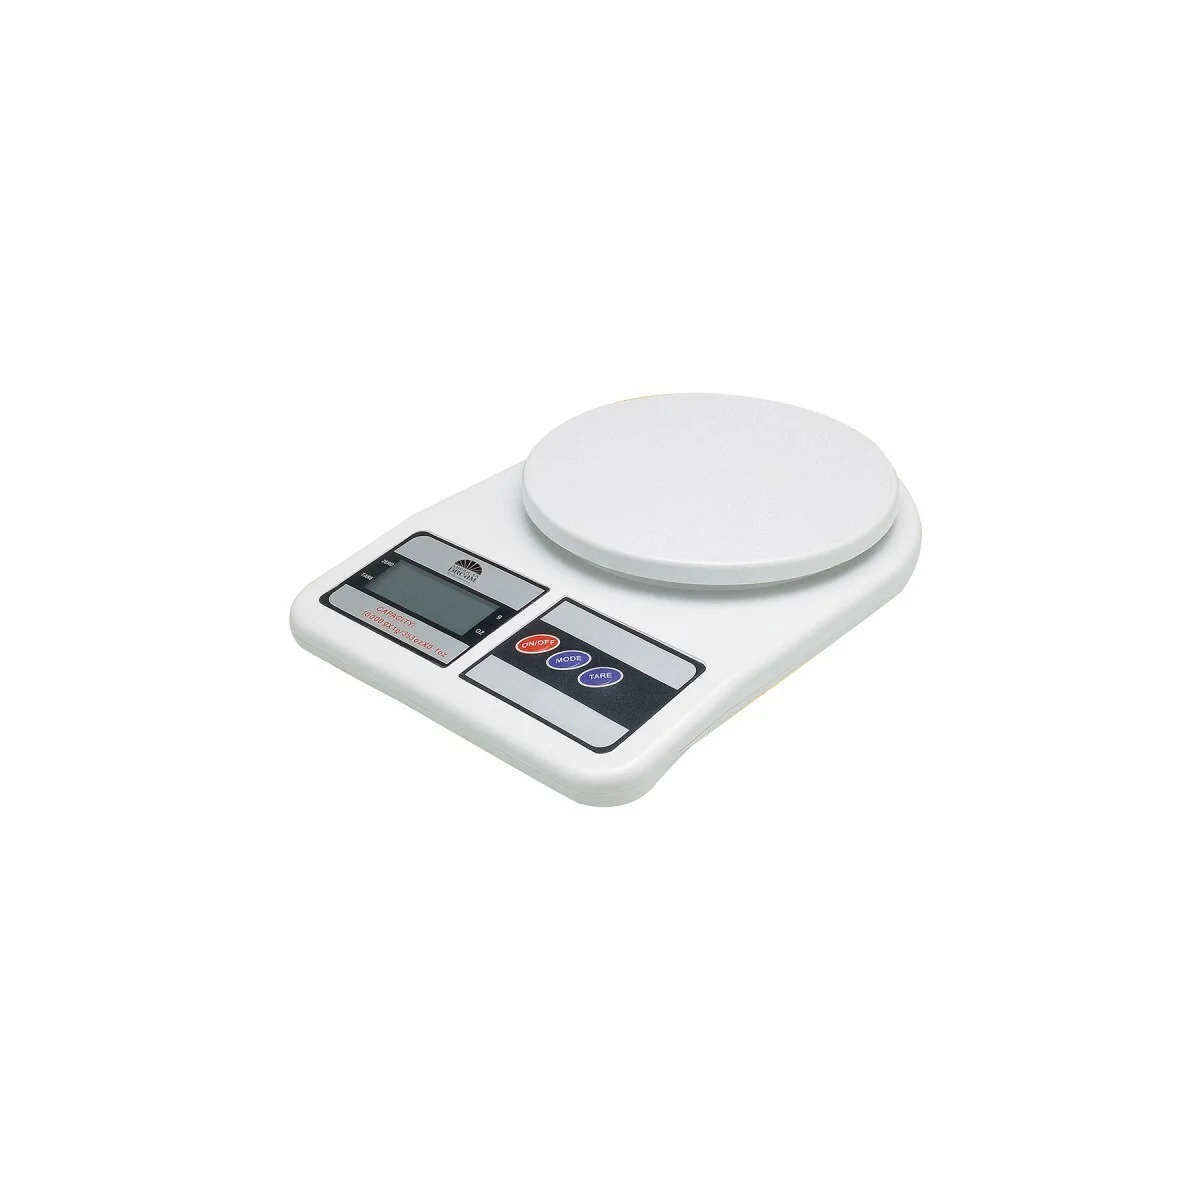 Review: The EatSmart Precision Pro Digital Kitchen Scale (and a